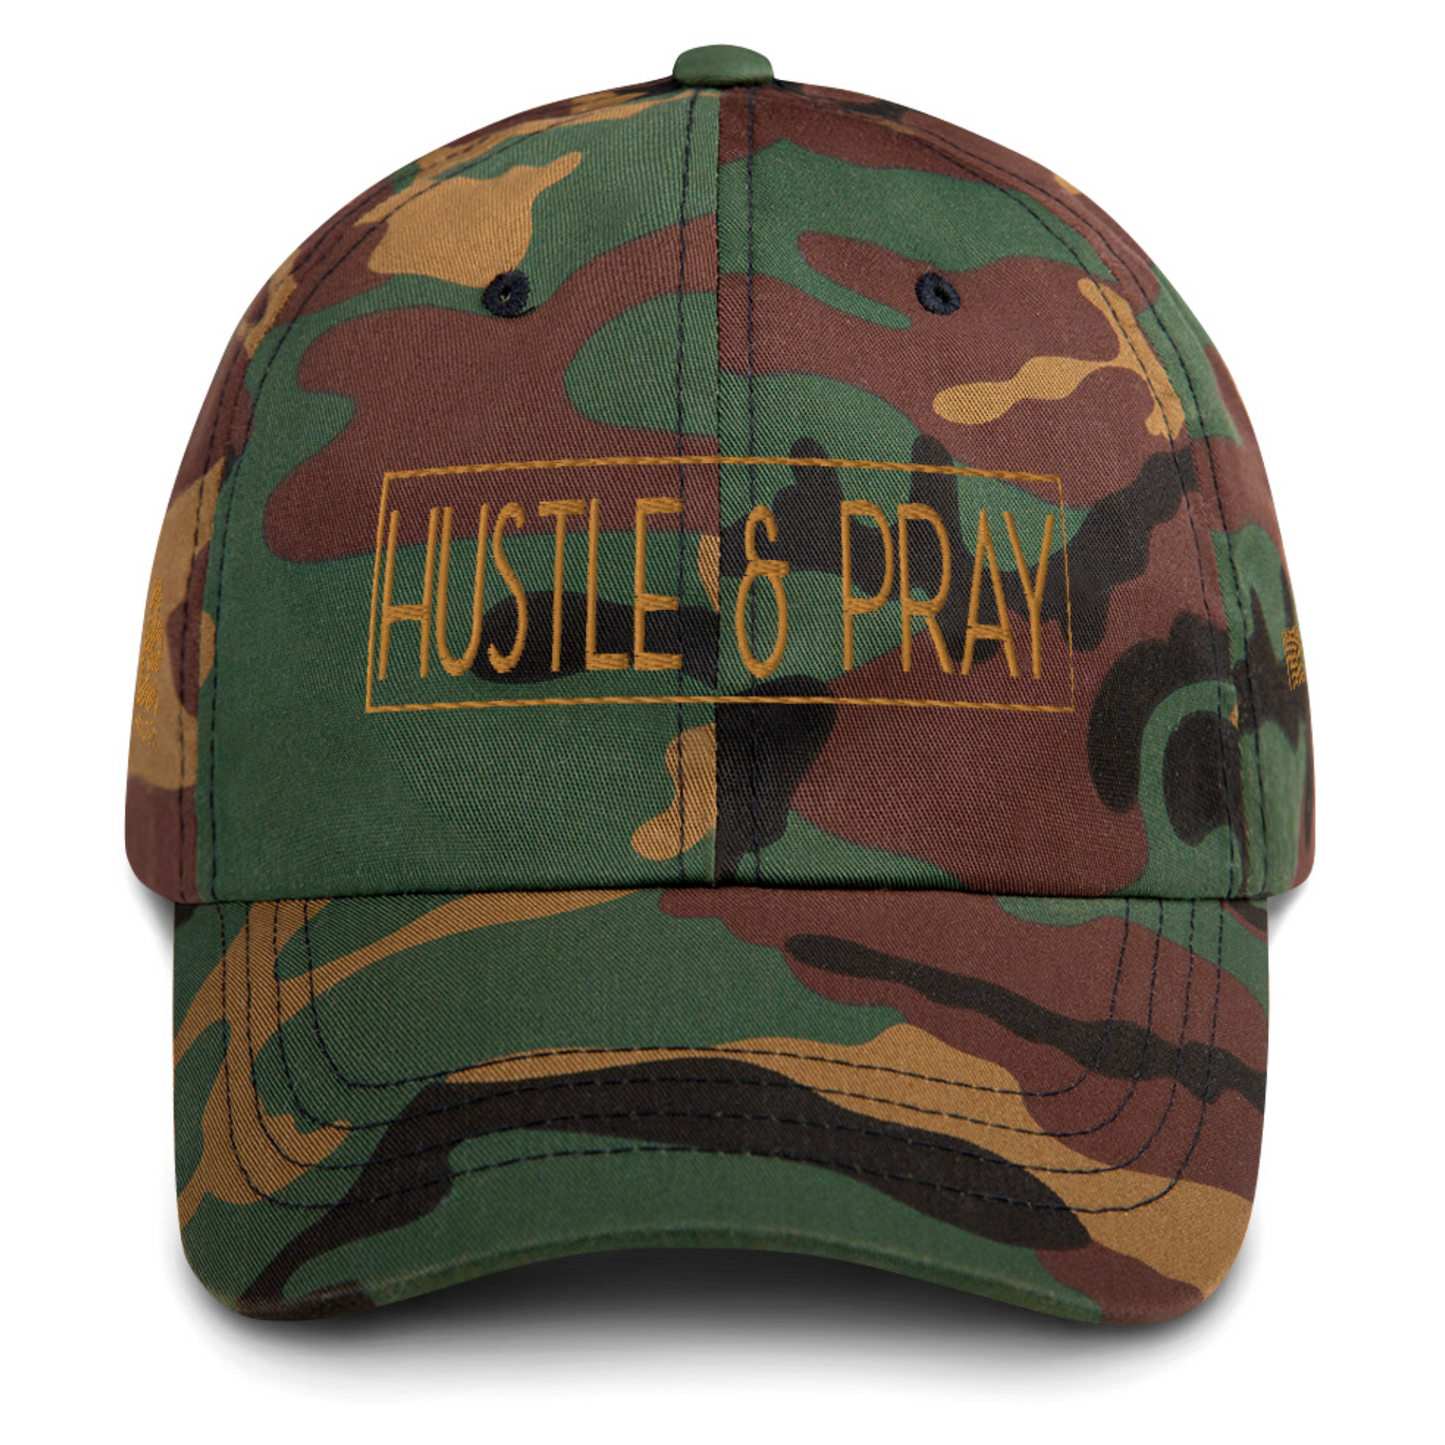 HUSTLE & PRAY - Camo Embroidered Dad Hat